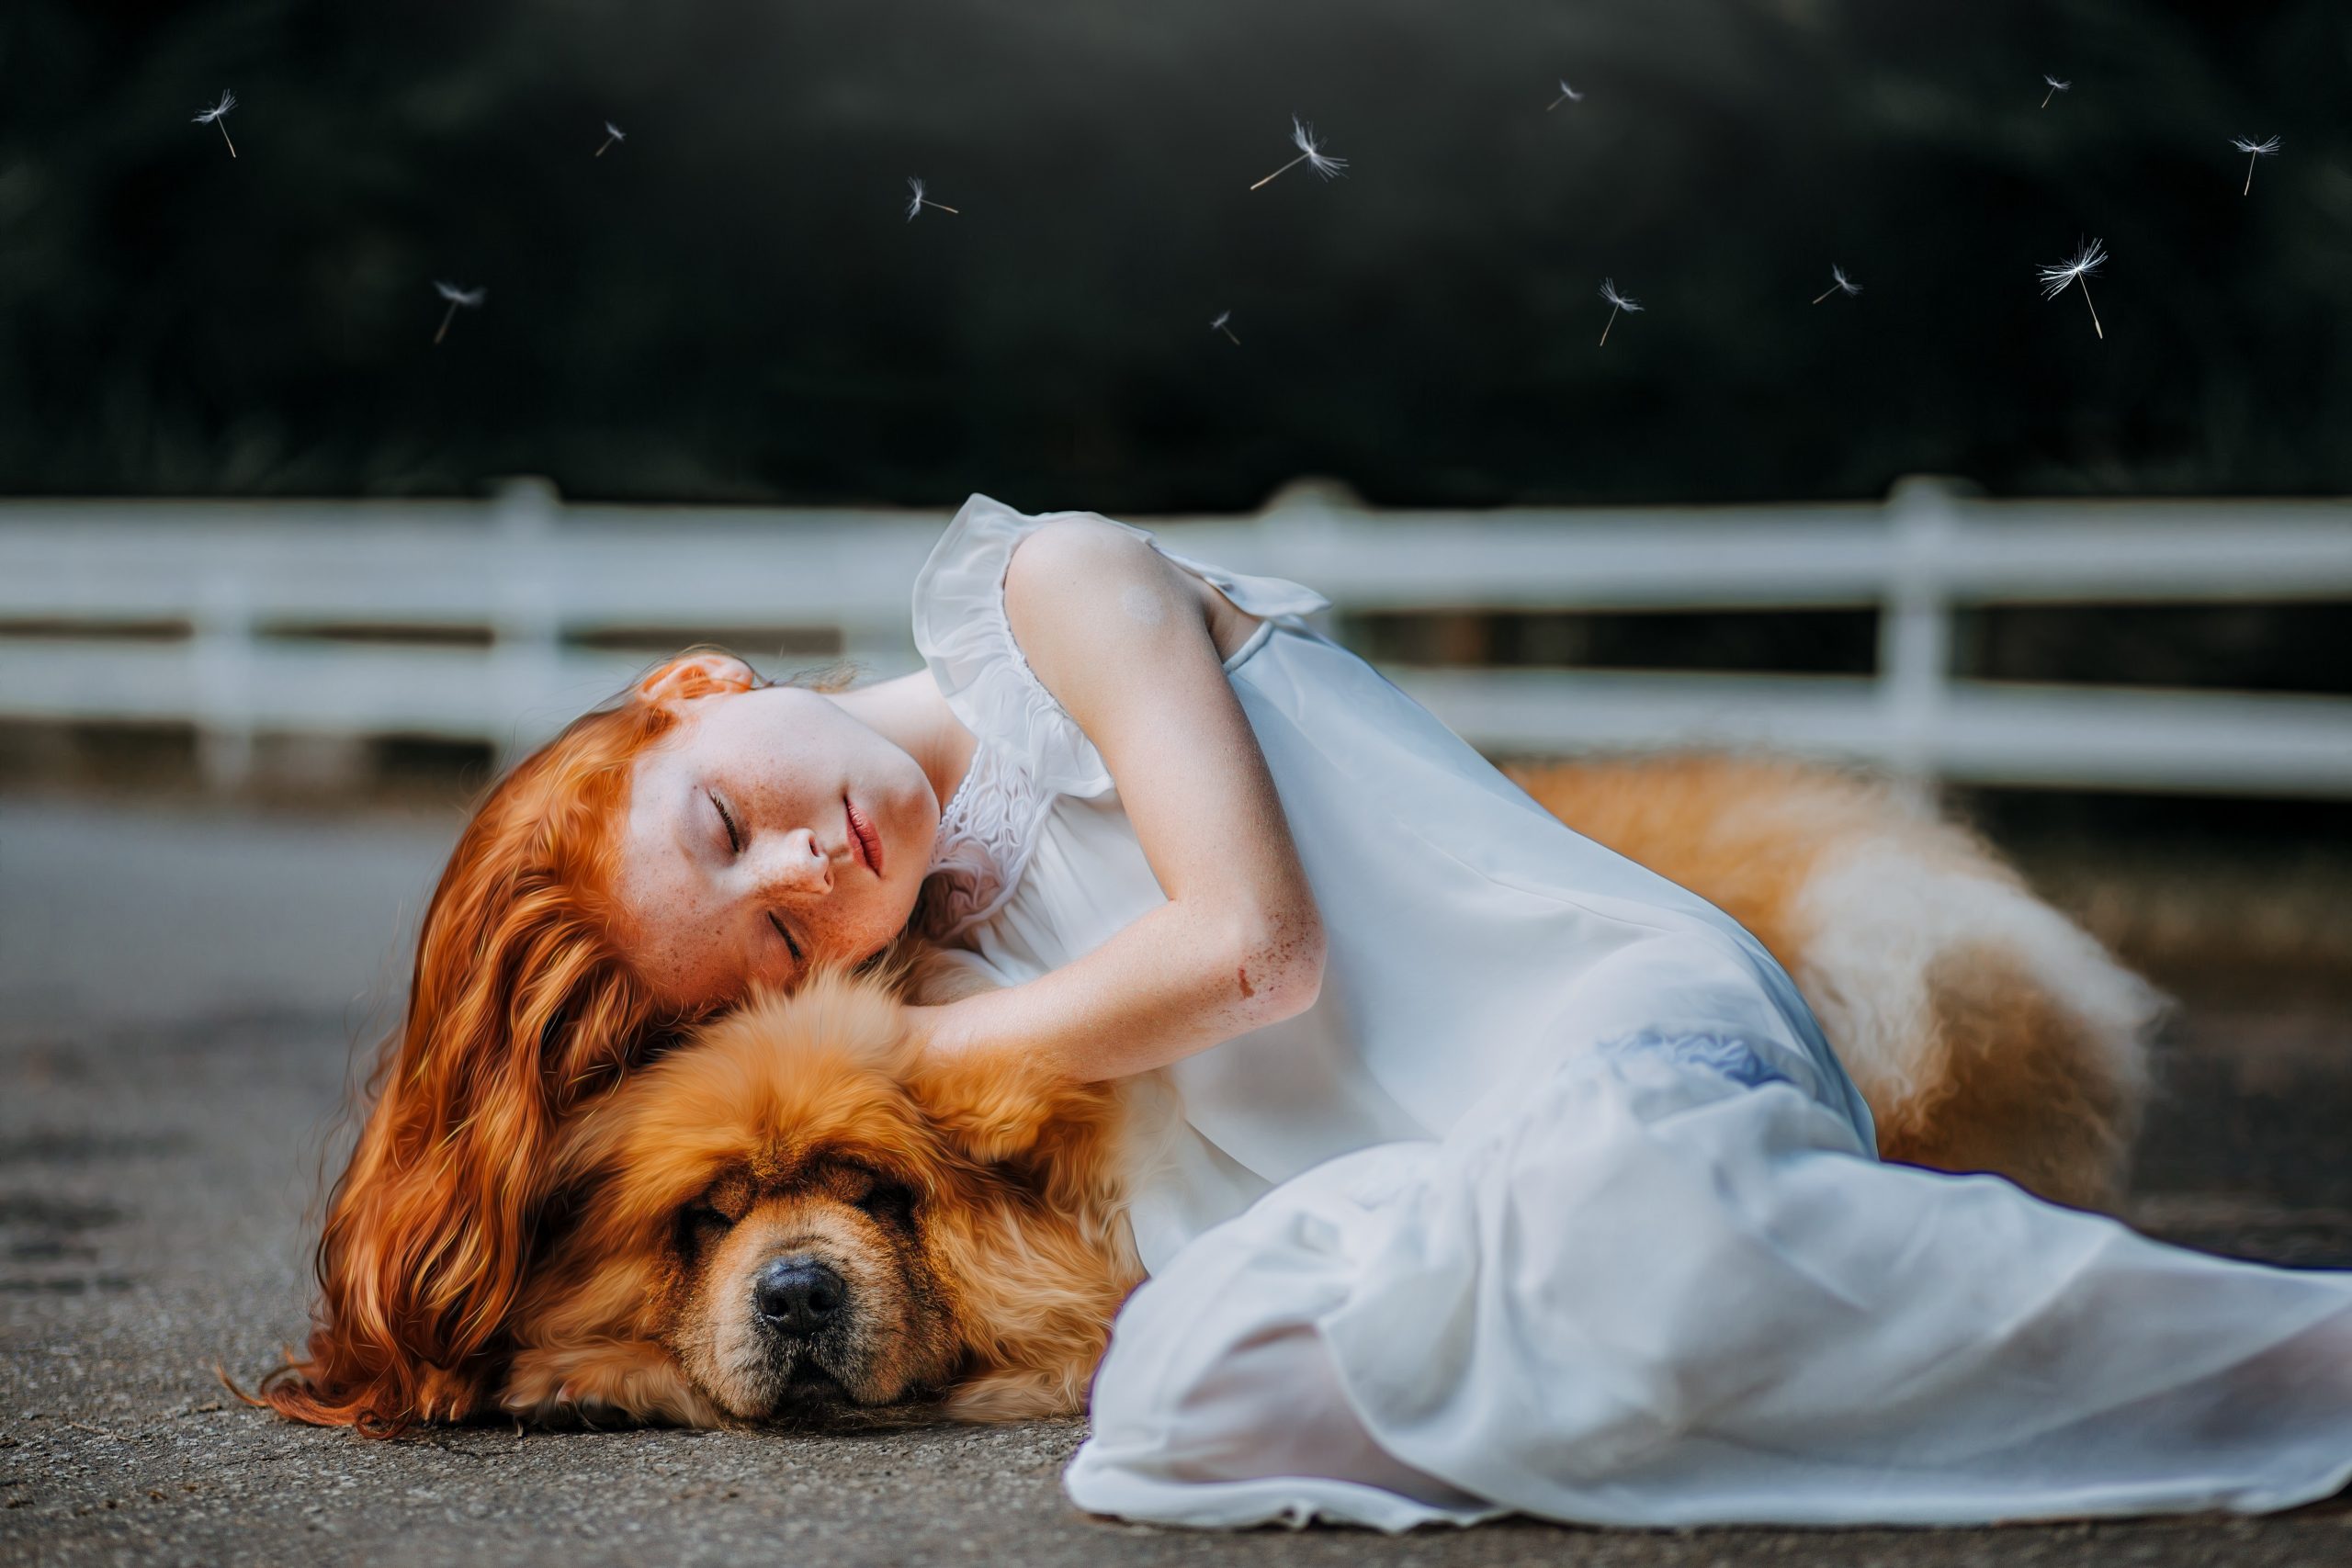 Pet Photography: Why You Should Go With It?